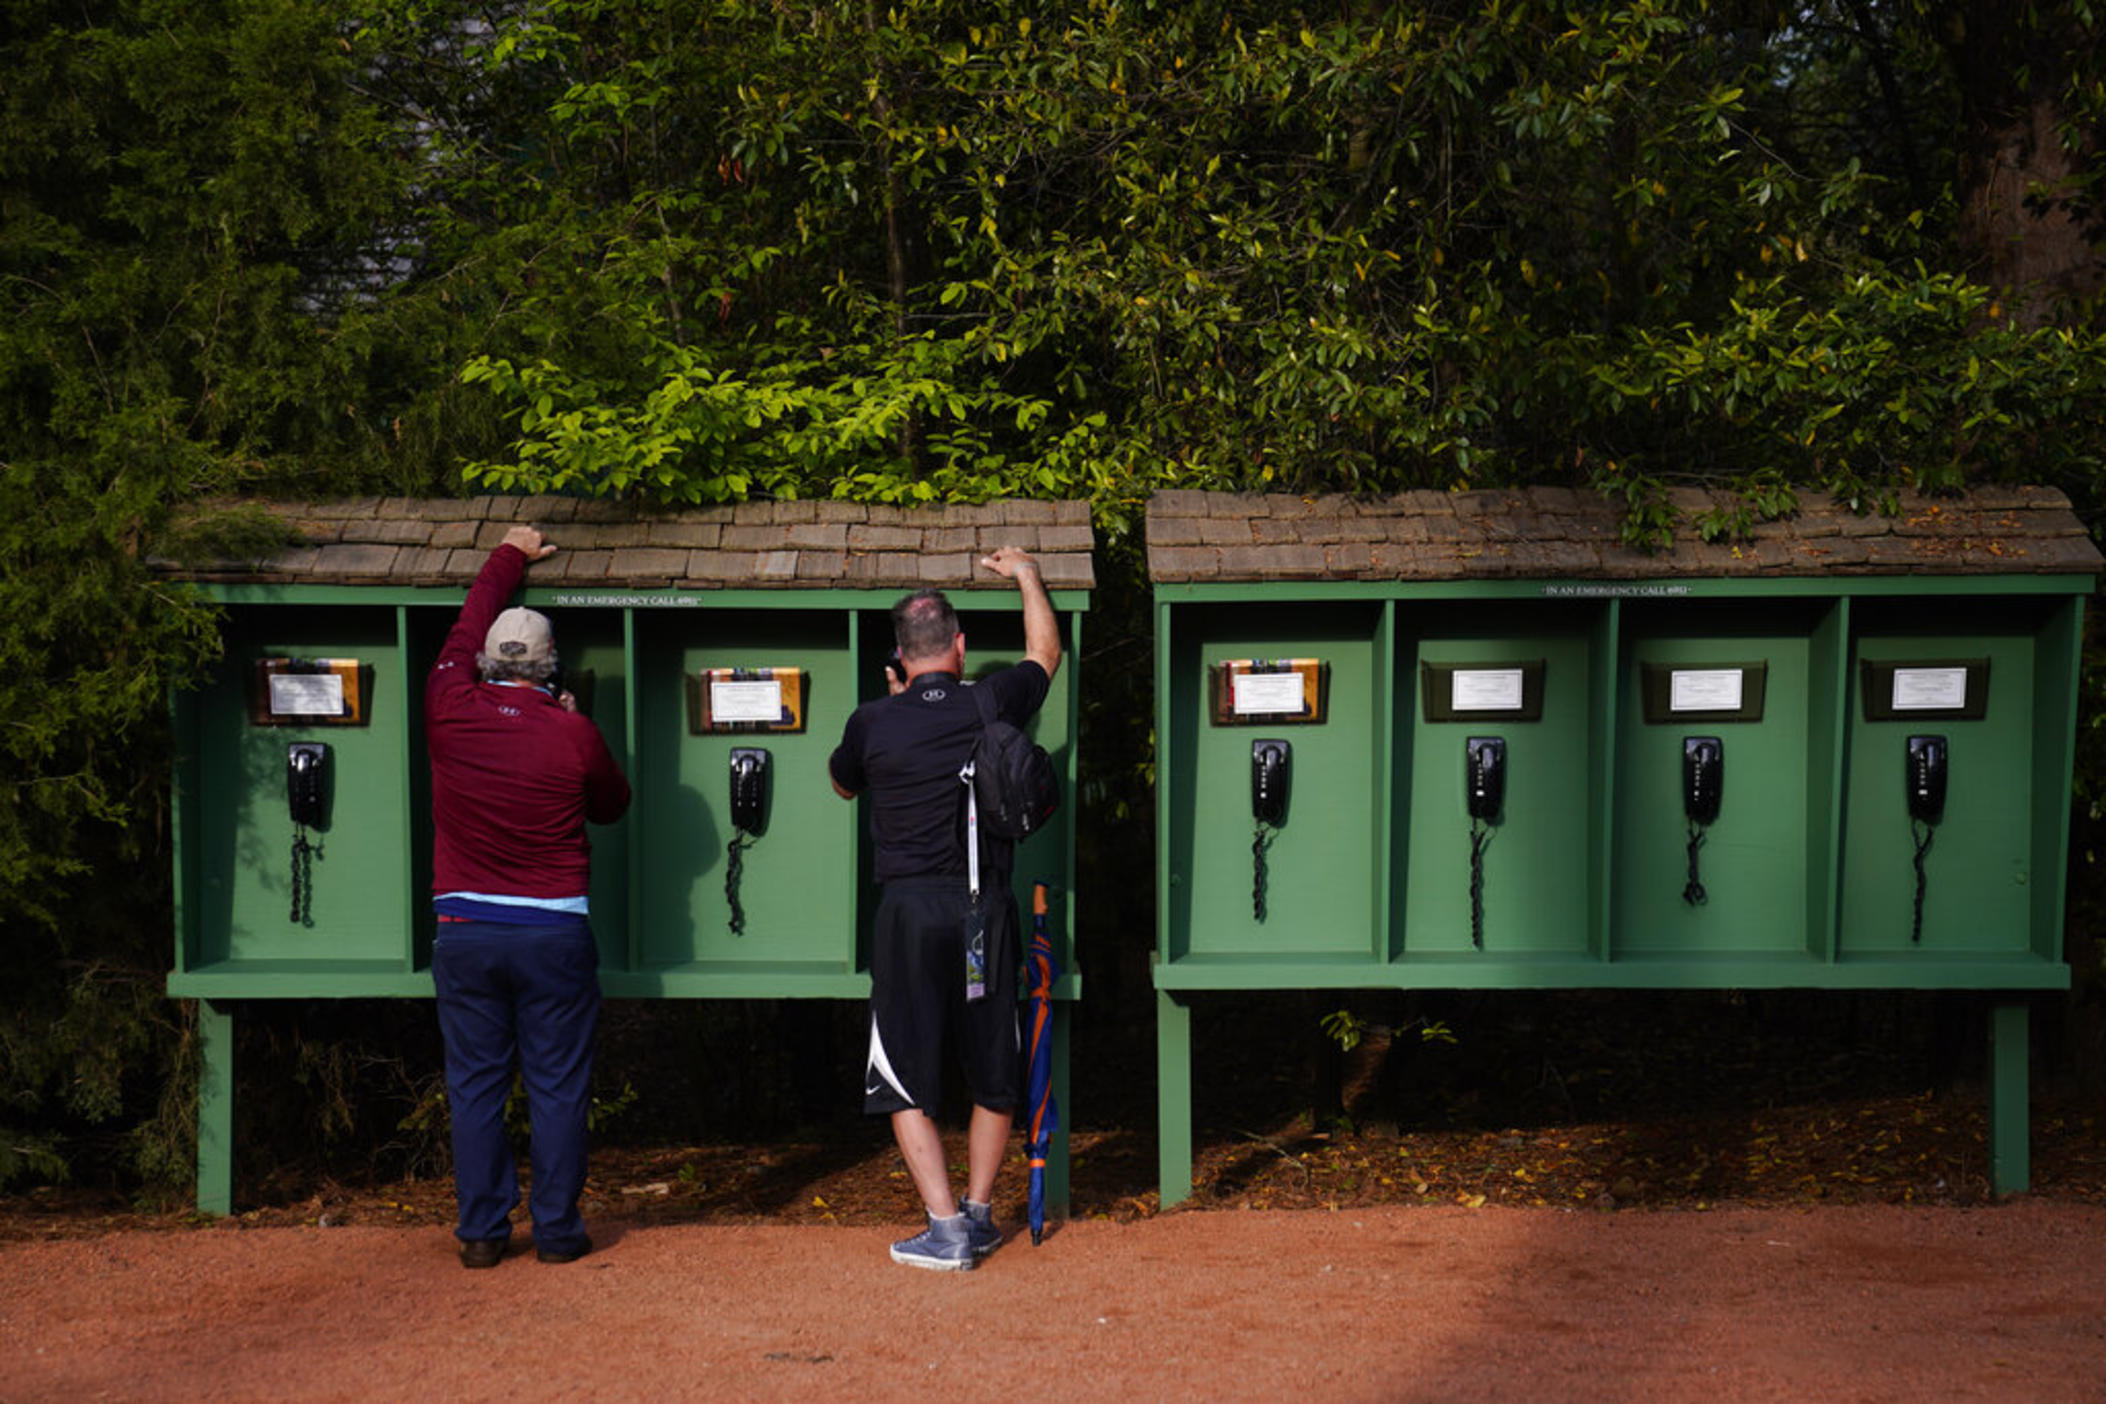 With mobile phones prohibited on the Augusta National Golf Course, spectators use phones provided by the club near the seventh hole during a practice round for the Masters golf tournament on Tuesday, April 5, 2022, in Augusta, Ga.